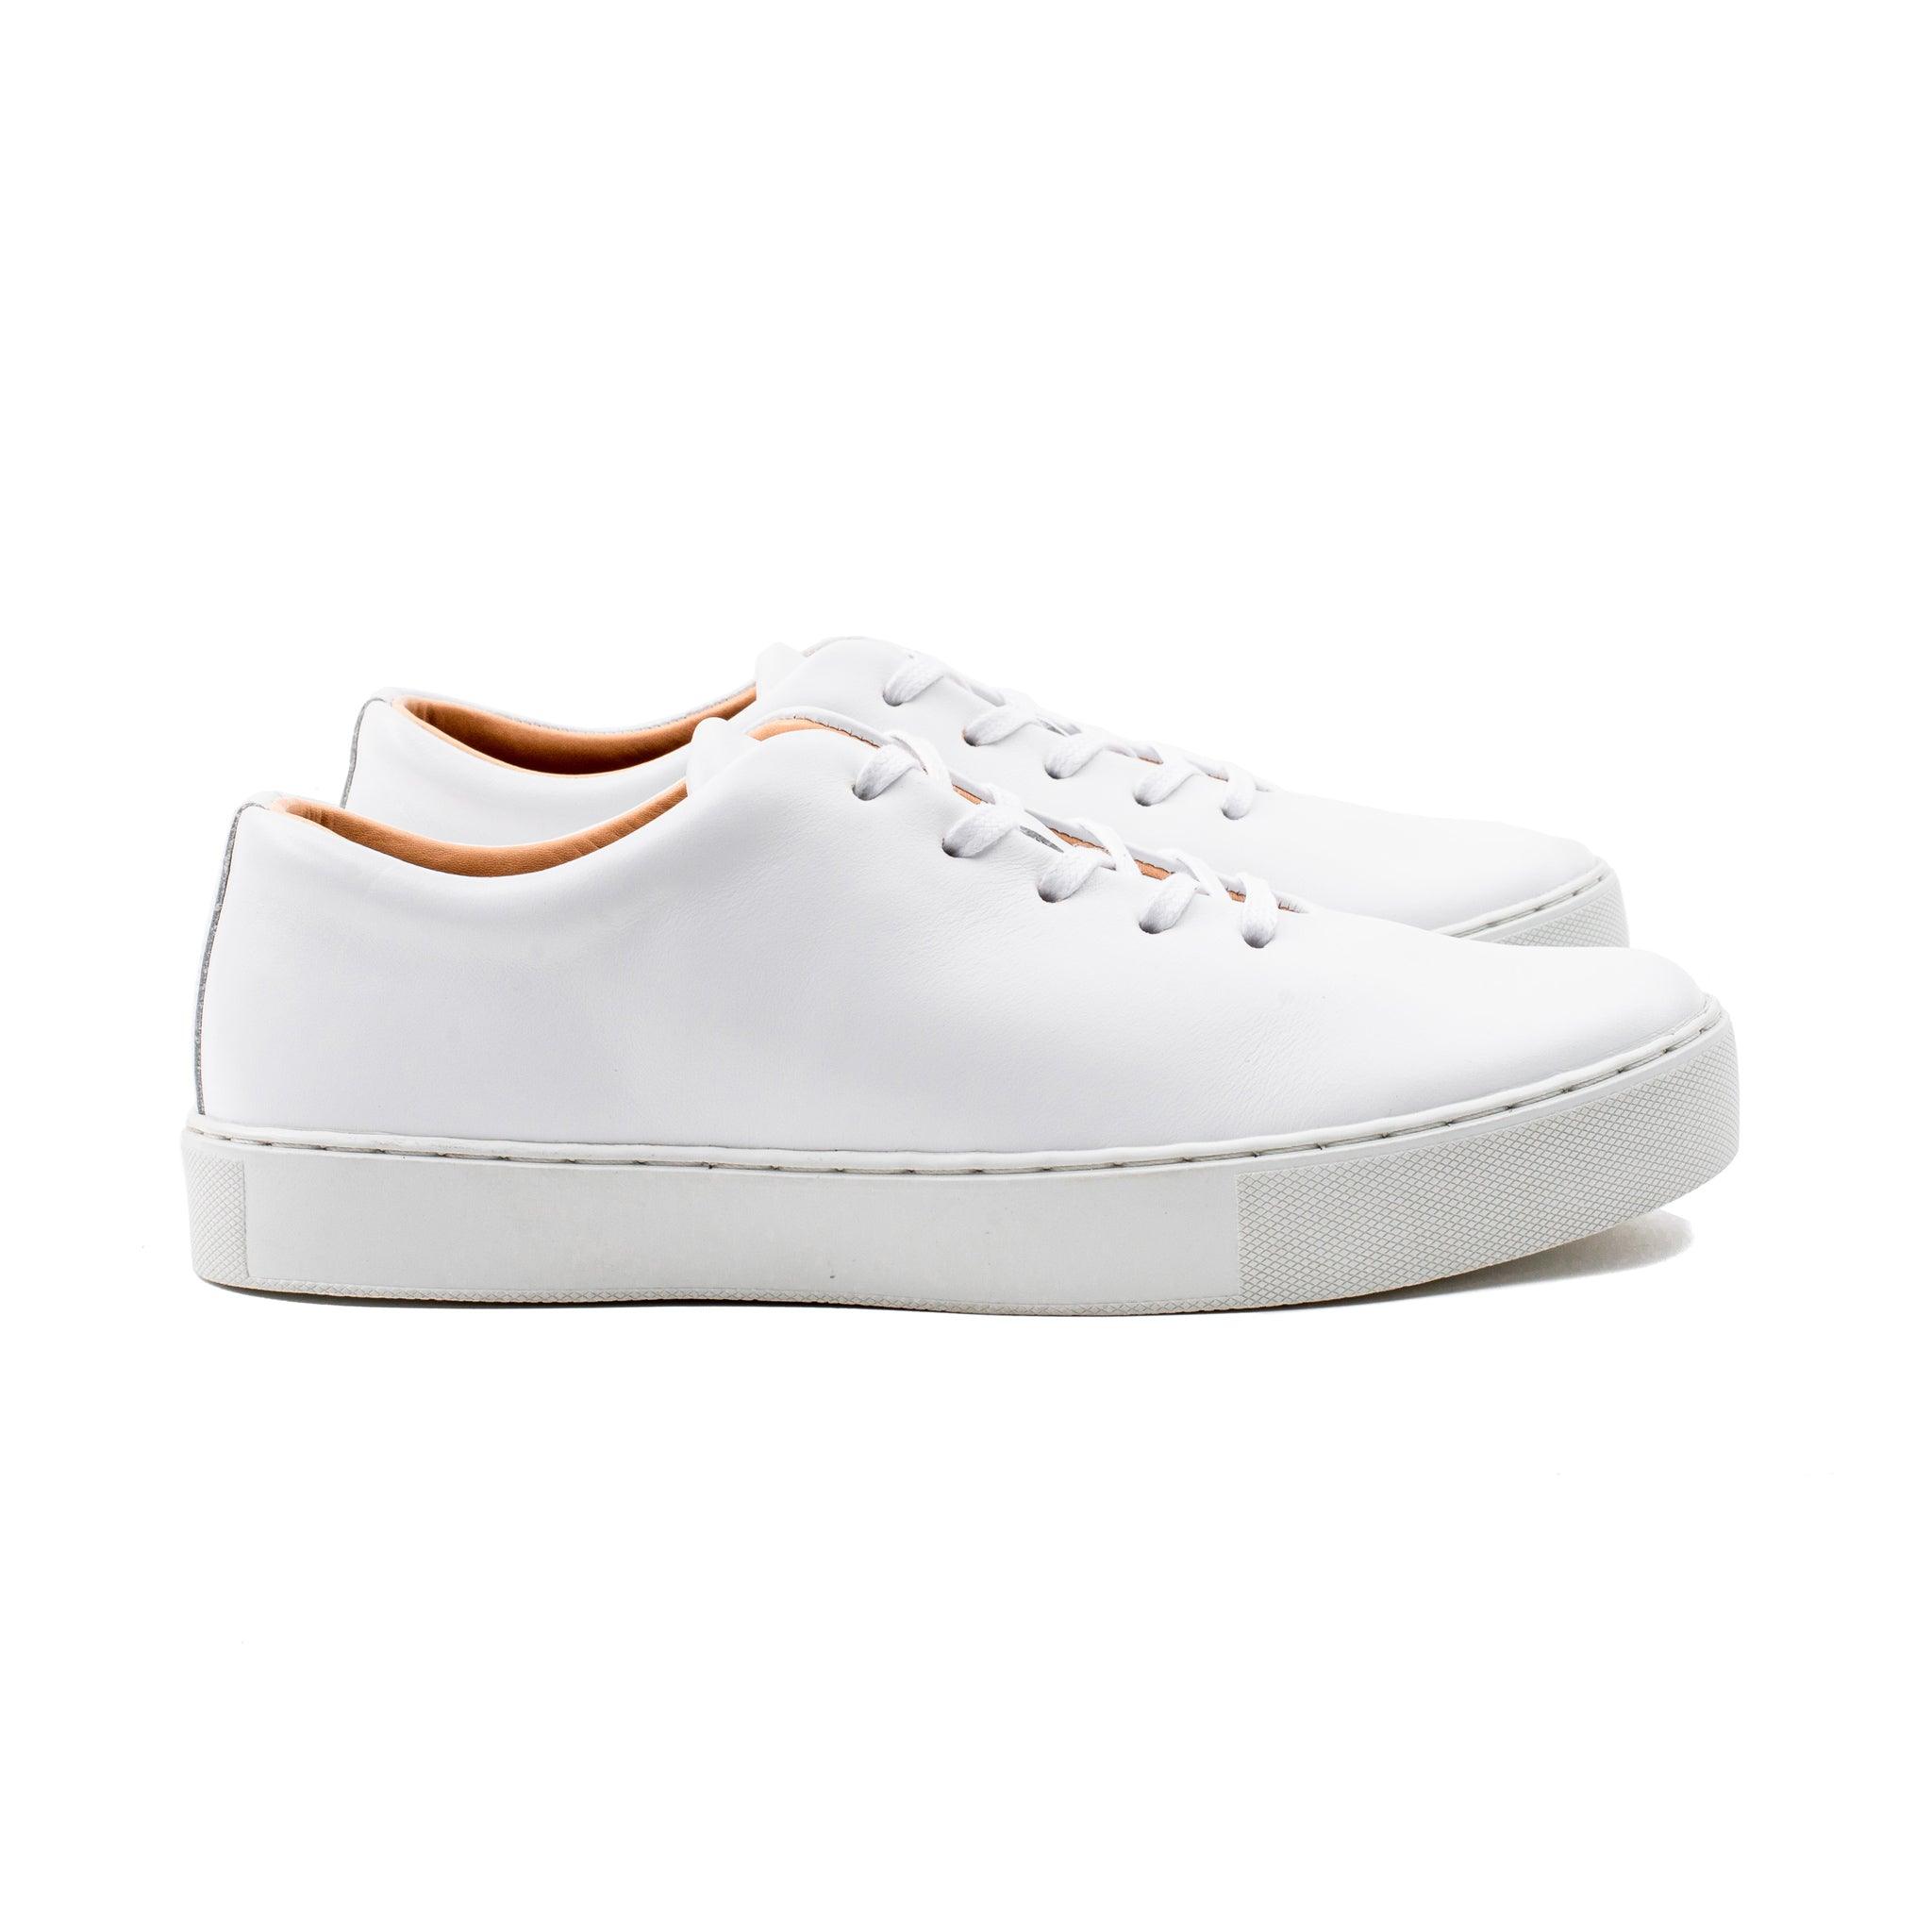 Wreck Integrere Learner Crown Northampton Upton Wholecut - All White Calf Leather Sneakers